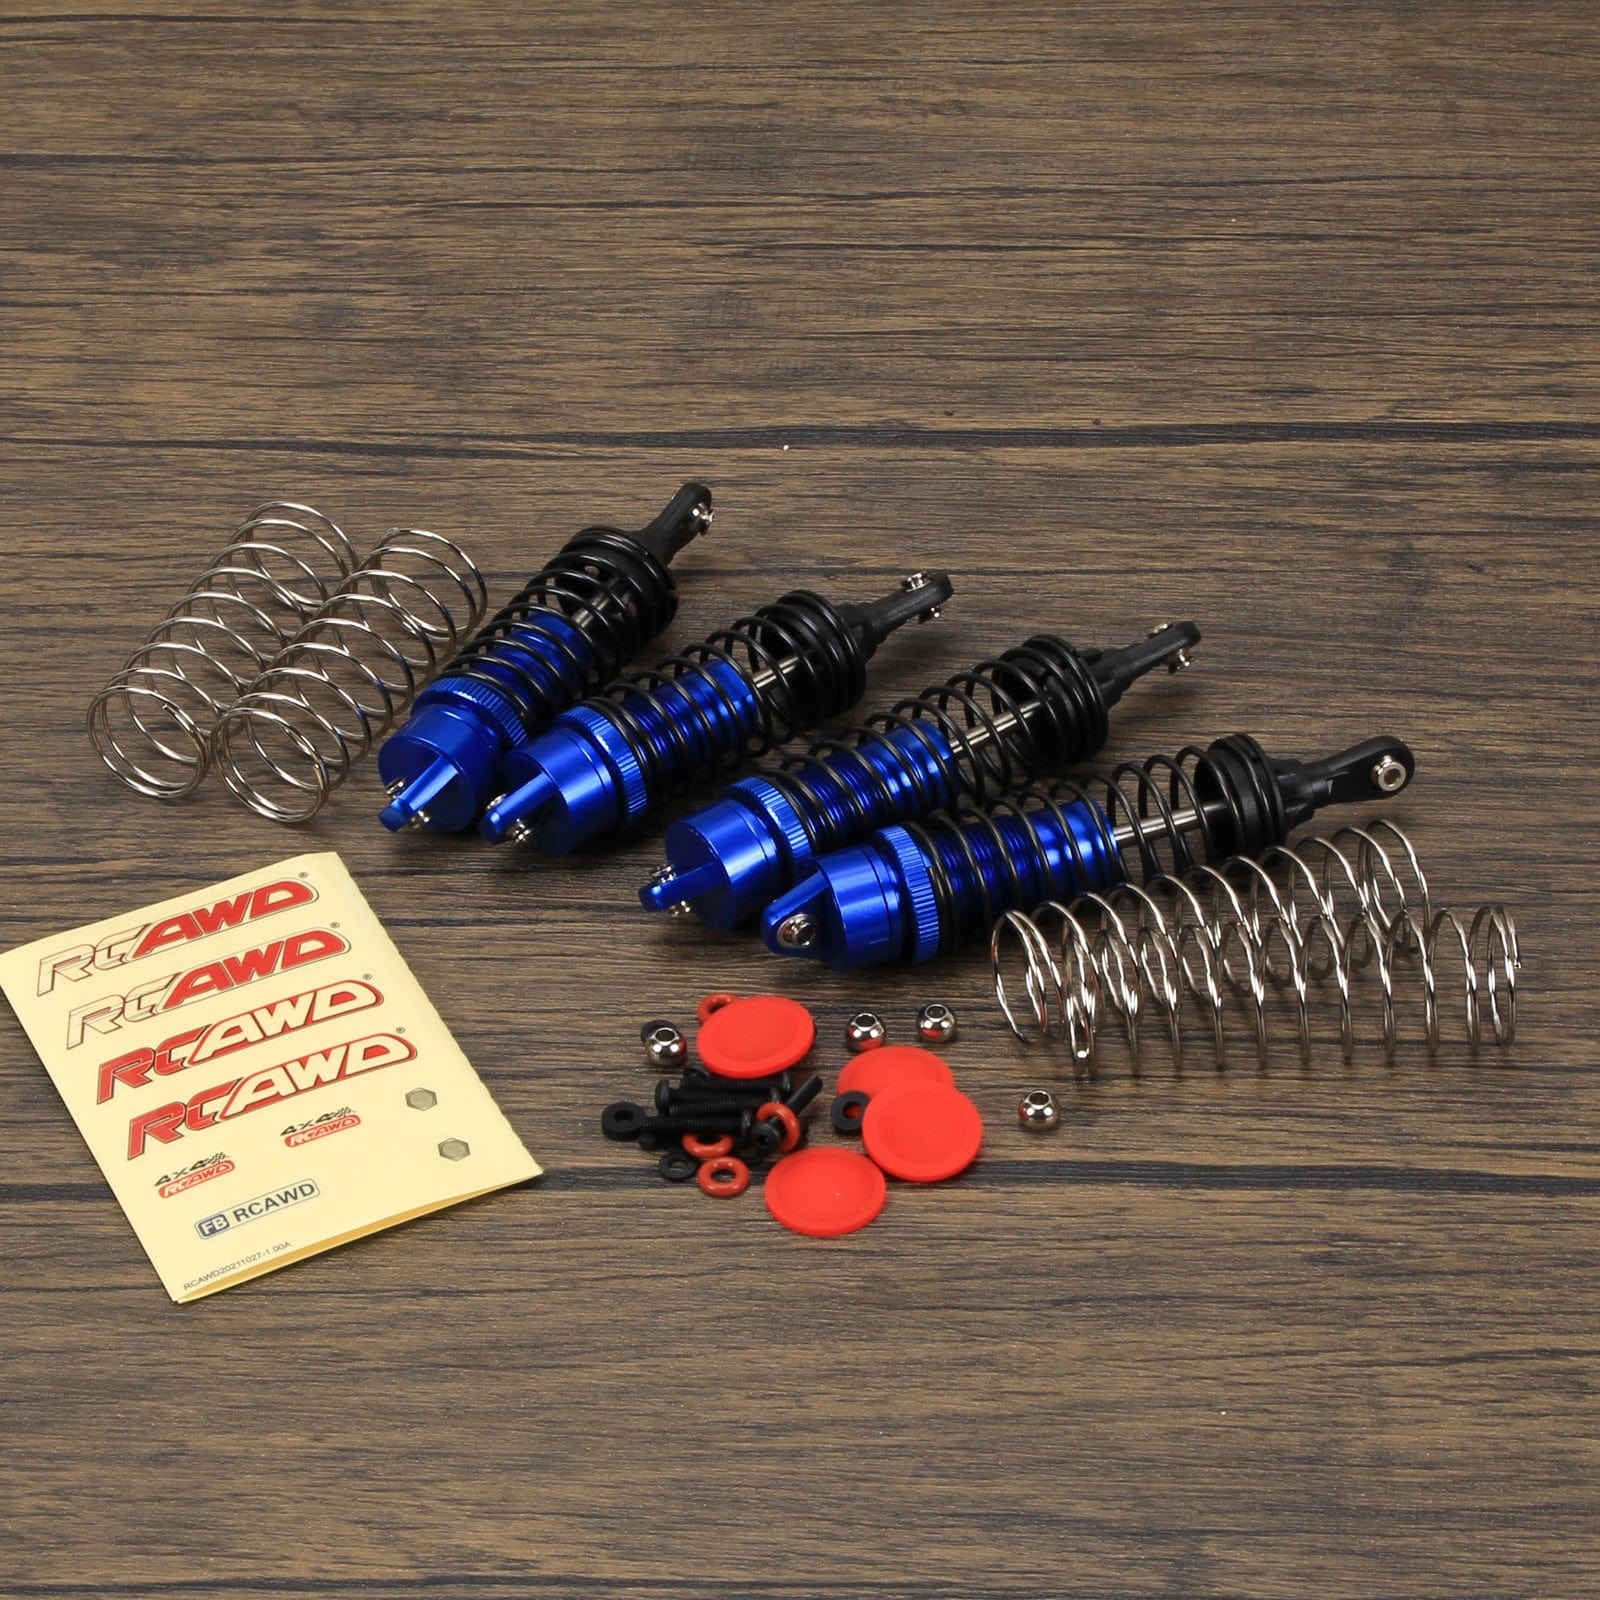 RCAWD TRAXXAS SLASH 4WD Navy Blue RCAWD Shocks absorber compatible with Slash Rustler 4X4